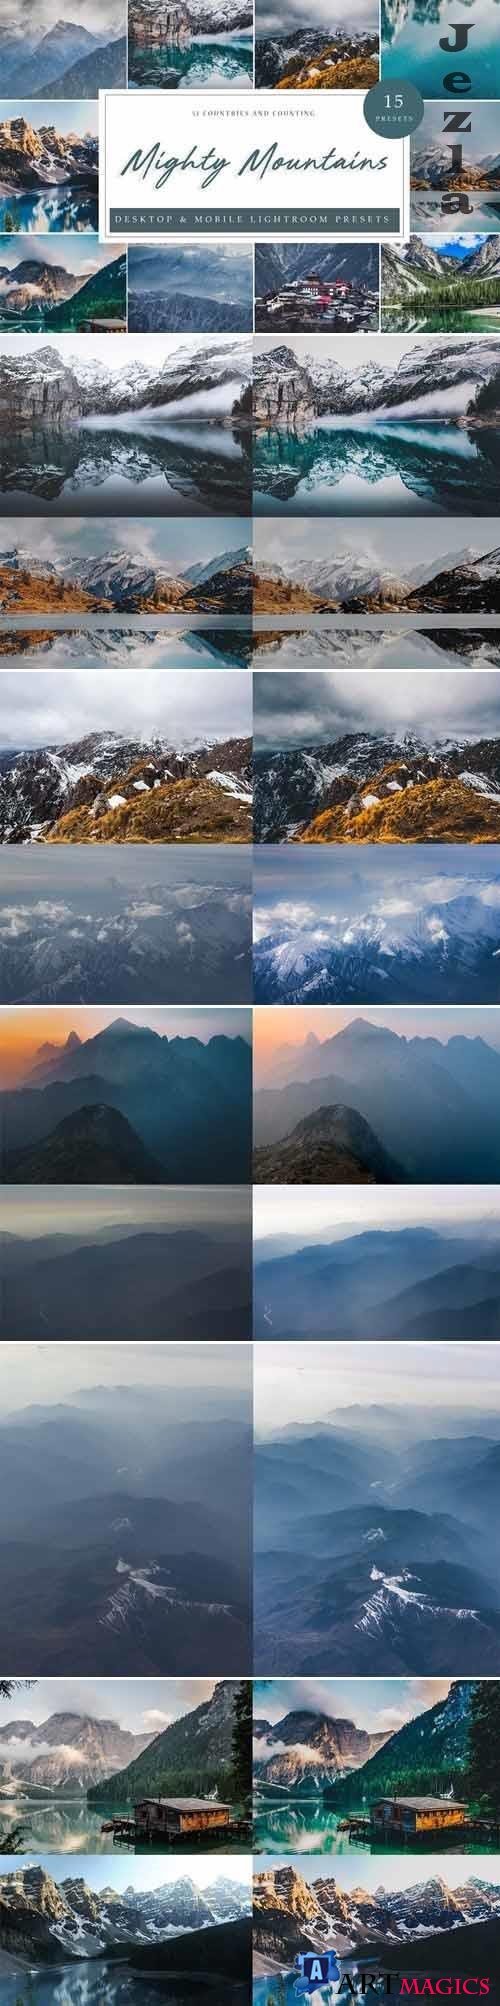 Lightroom Presets - Mighty Mountains